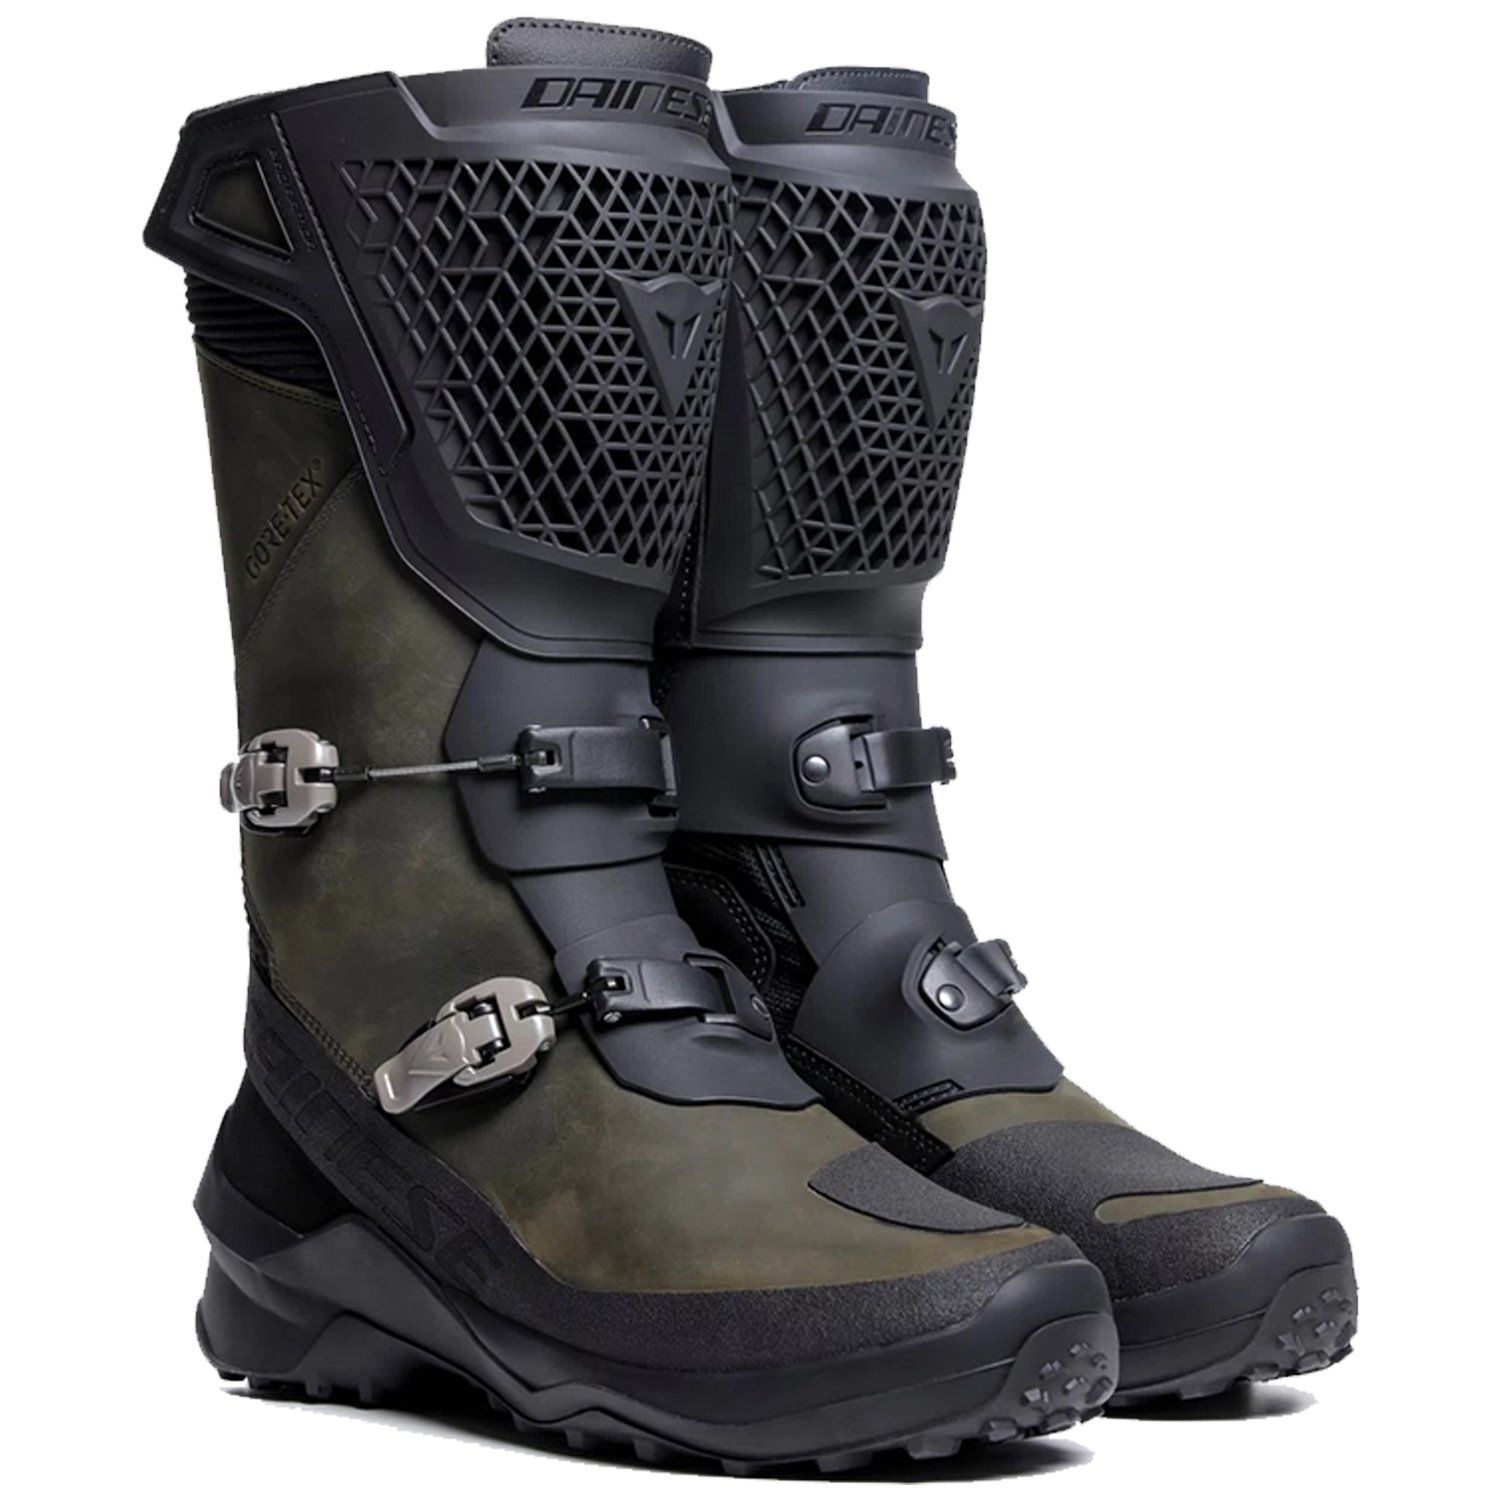 Image of Dainese Seeker Gore-Tex Boots Black Army Green Size 40 ID 8051019544483